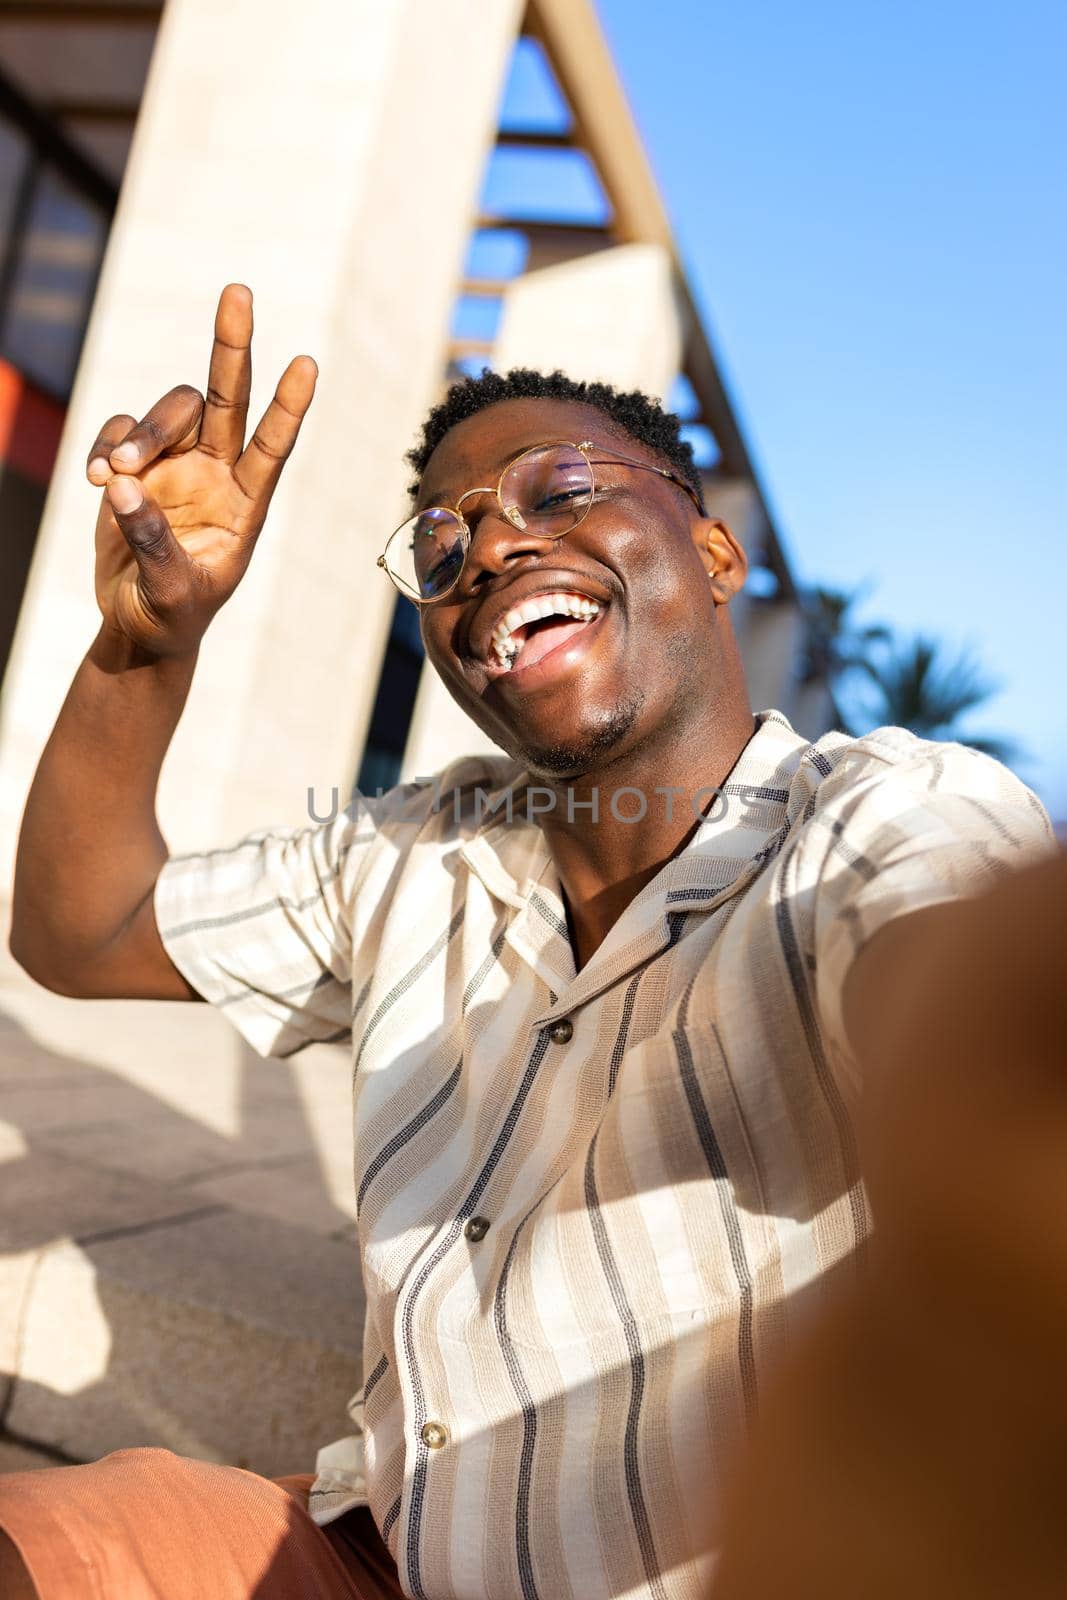 African american man with glasses taking selfie outdoors looking at camera making peace sign. Vertical image. by Hoverstock